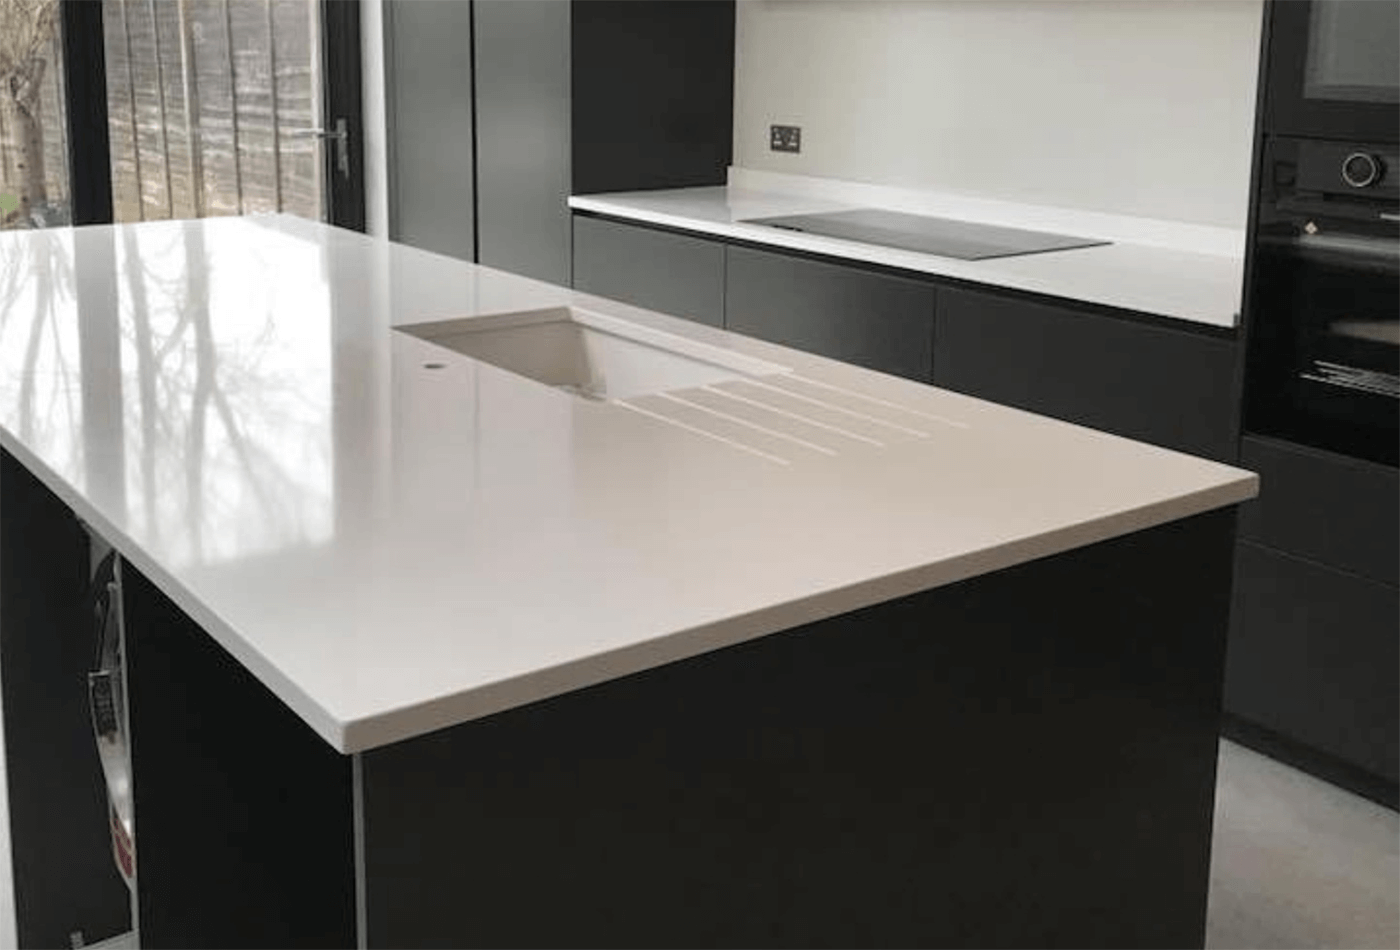 Why Do You Want Pure White Quartz Worktops in Your Kitchen